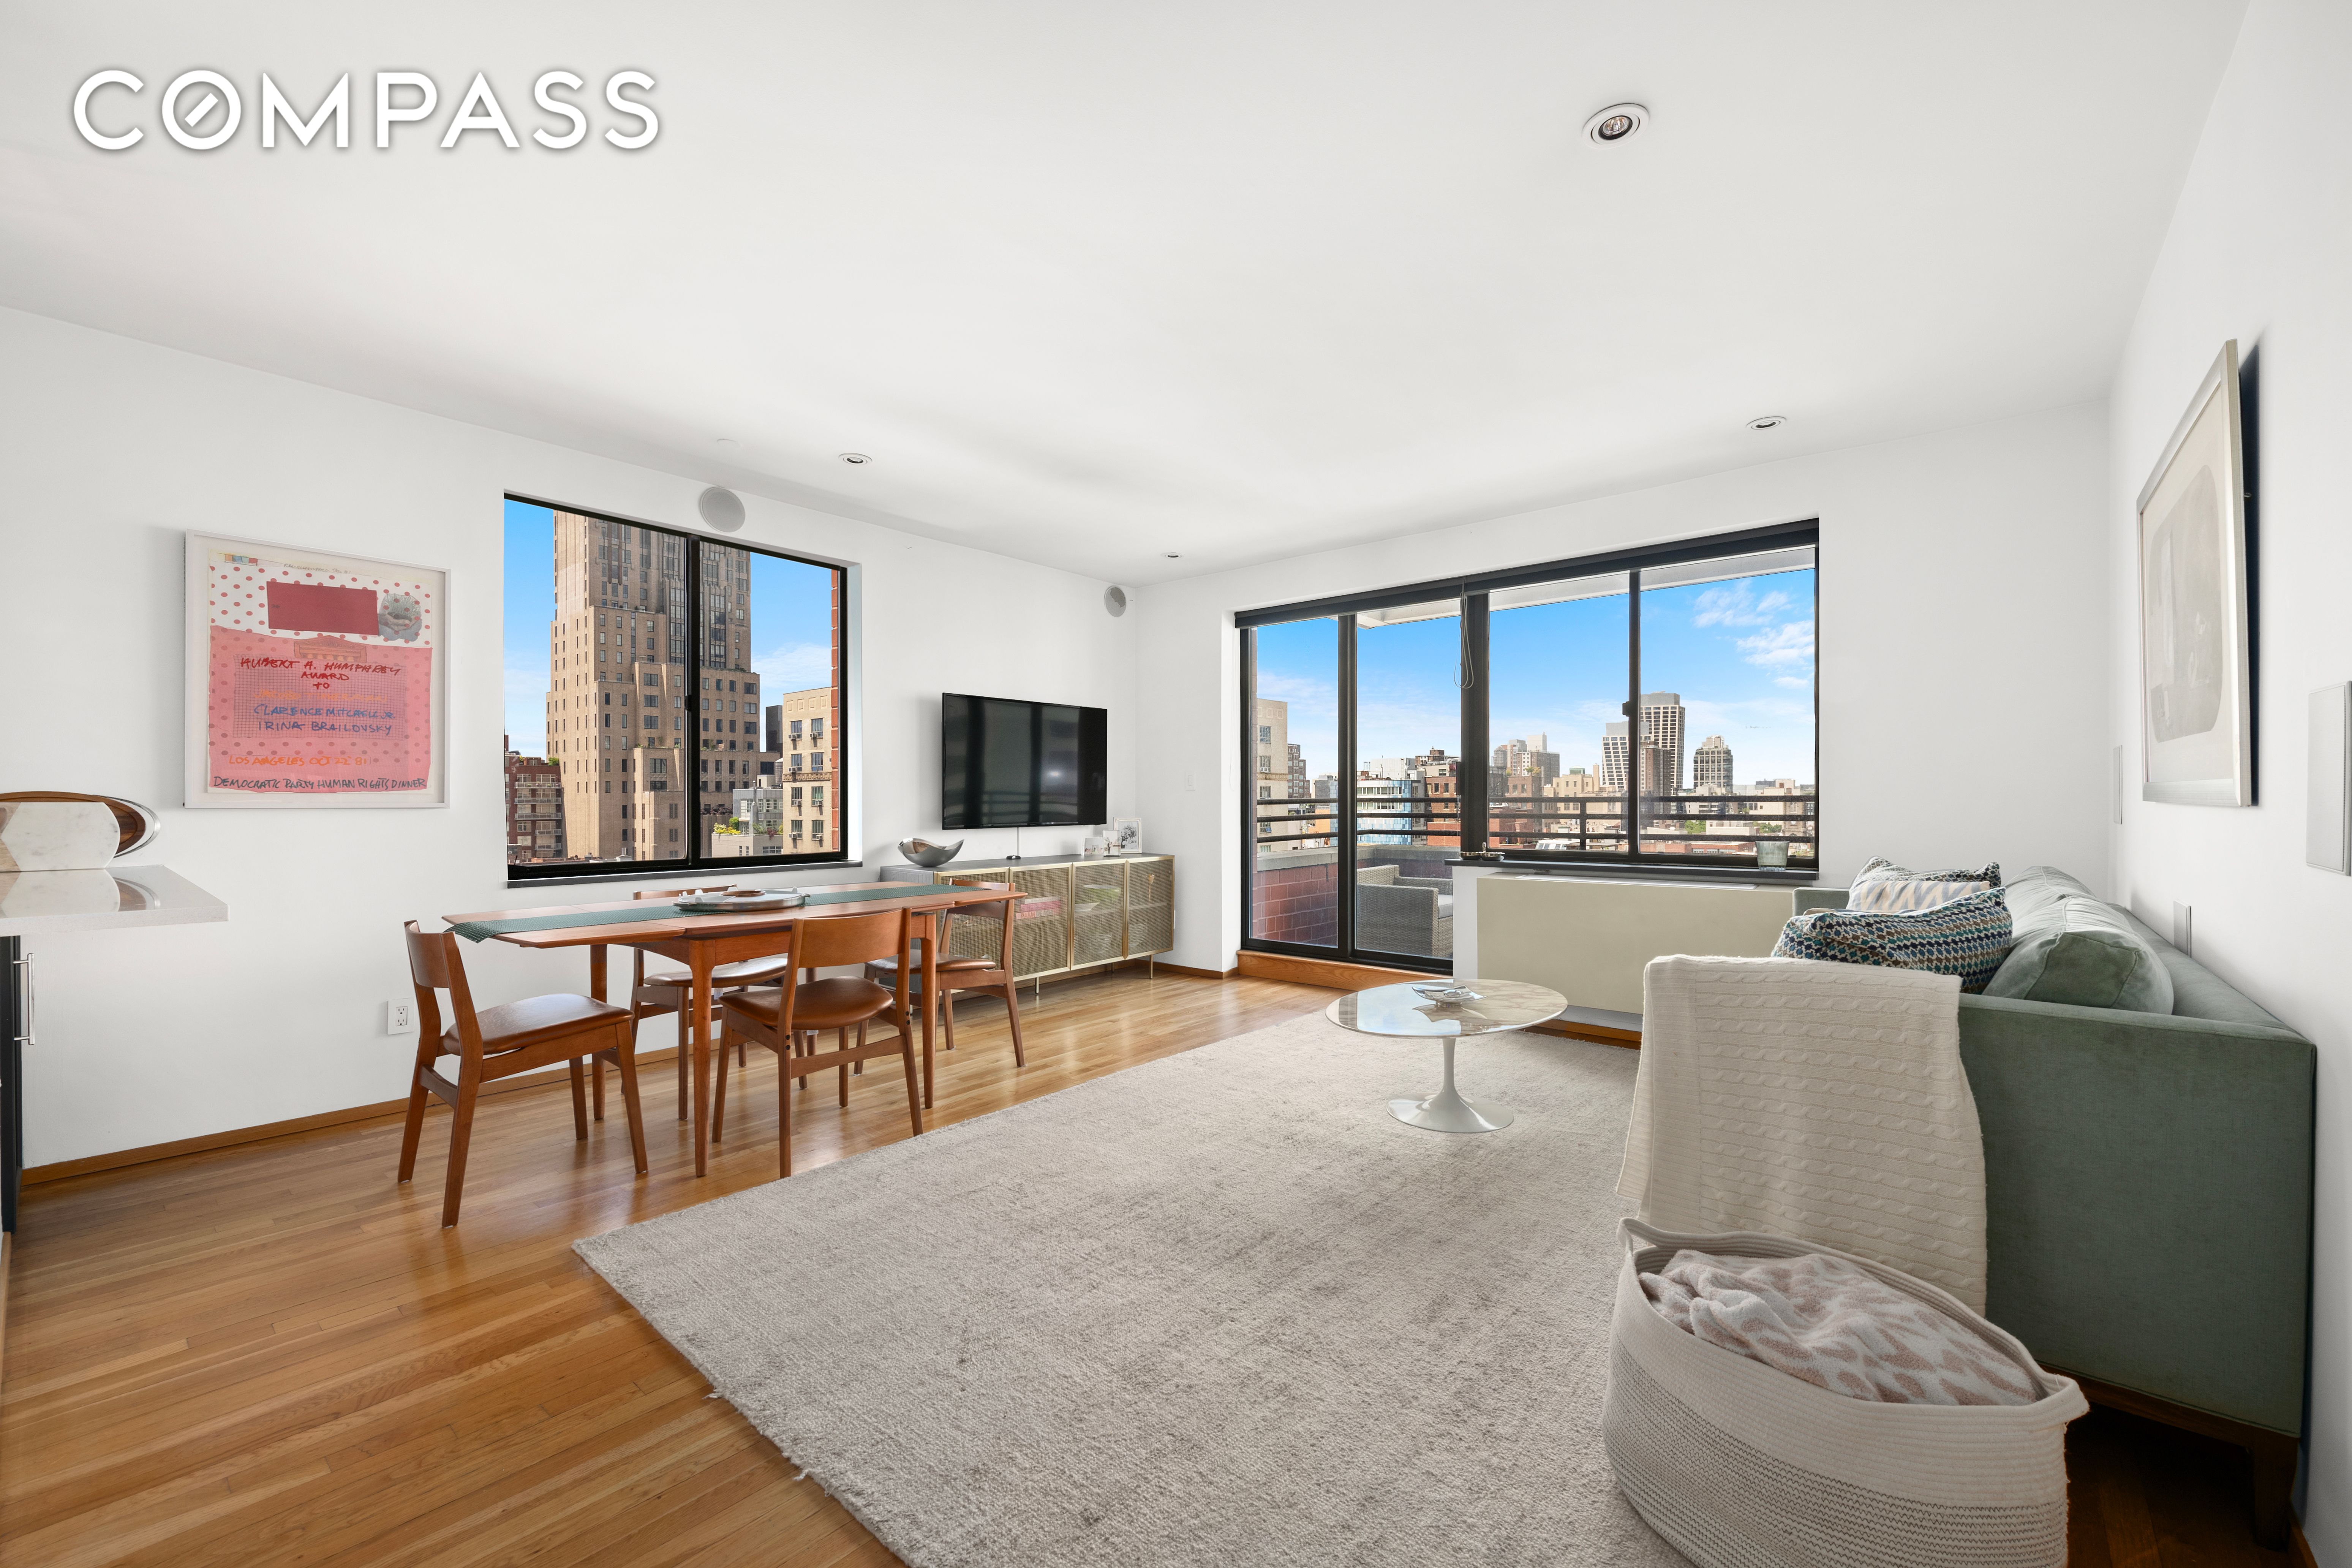 181 7th Avenue 11A, Chelsea, Downtown, NYC - 2 Bedrooms  
2 Bathrooms  
4 Rooms - 